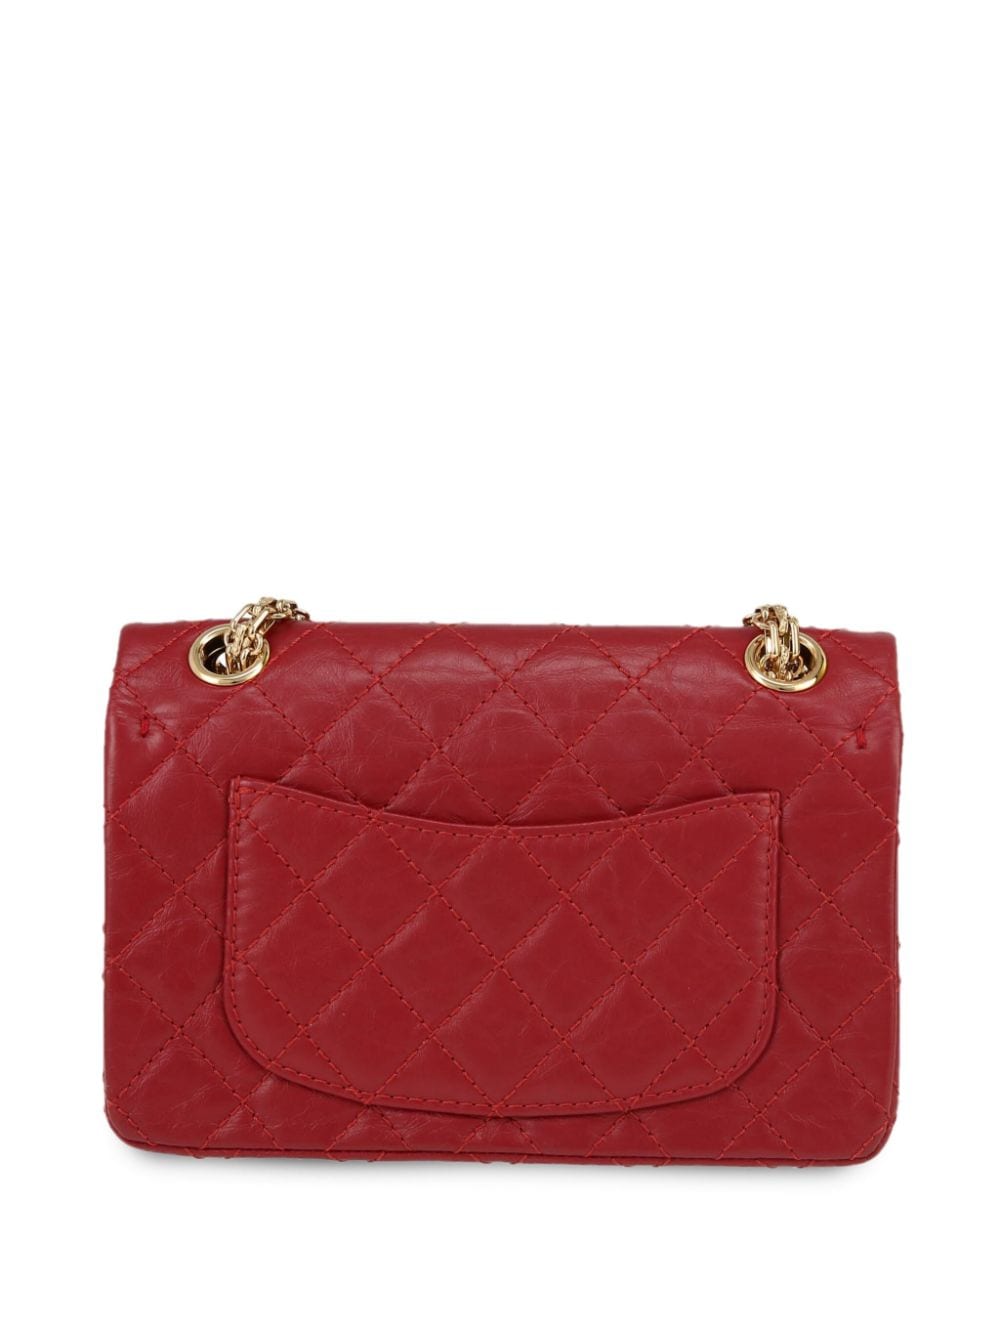 CHANEL Pre-Owned 2020 2.55 reissue schoudertas - Rood